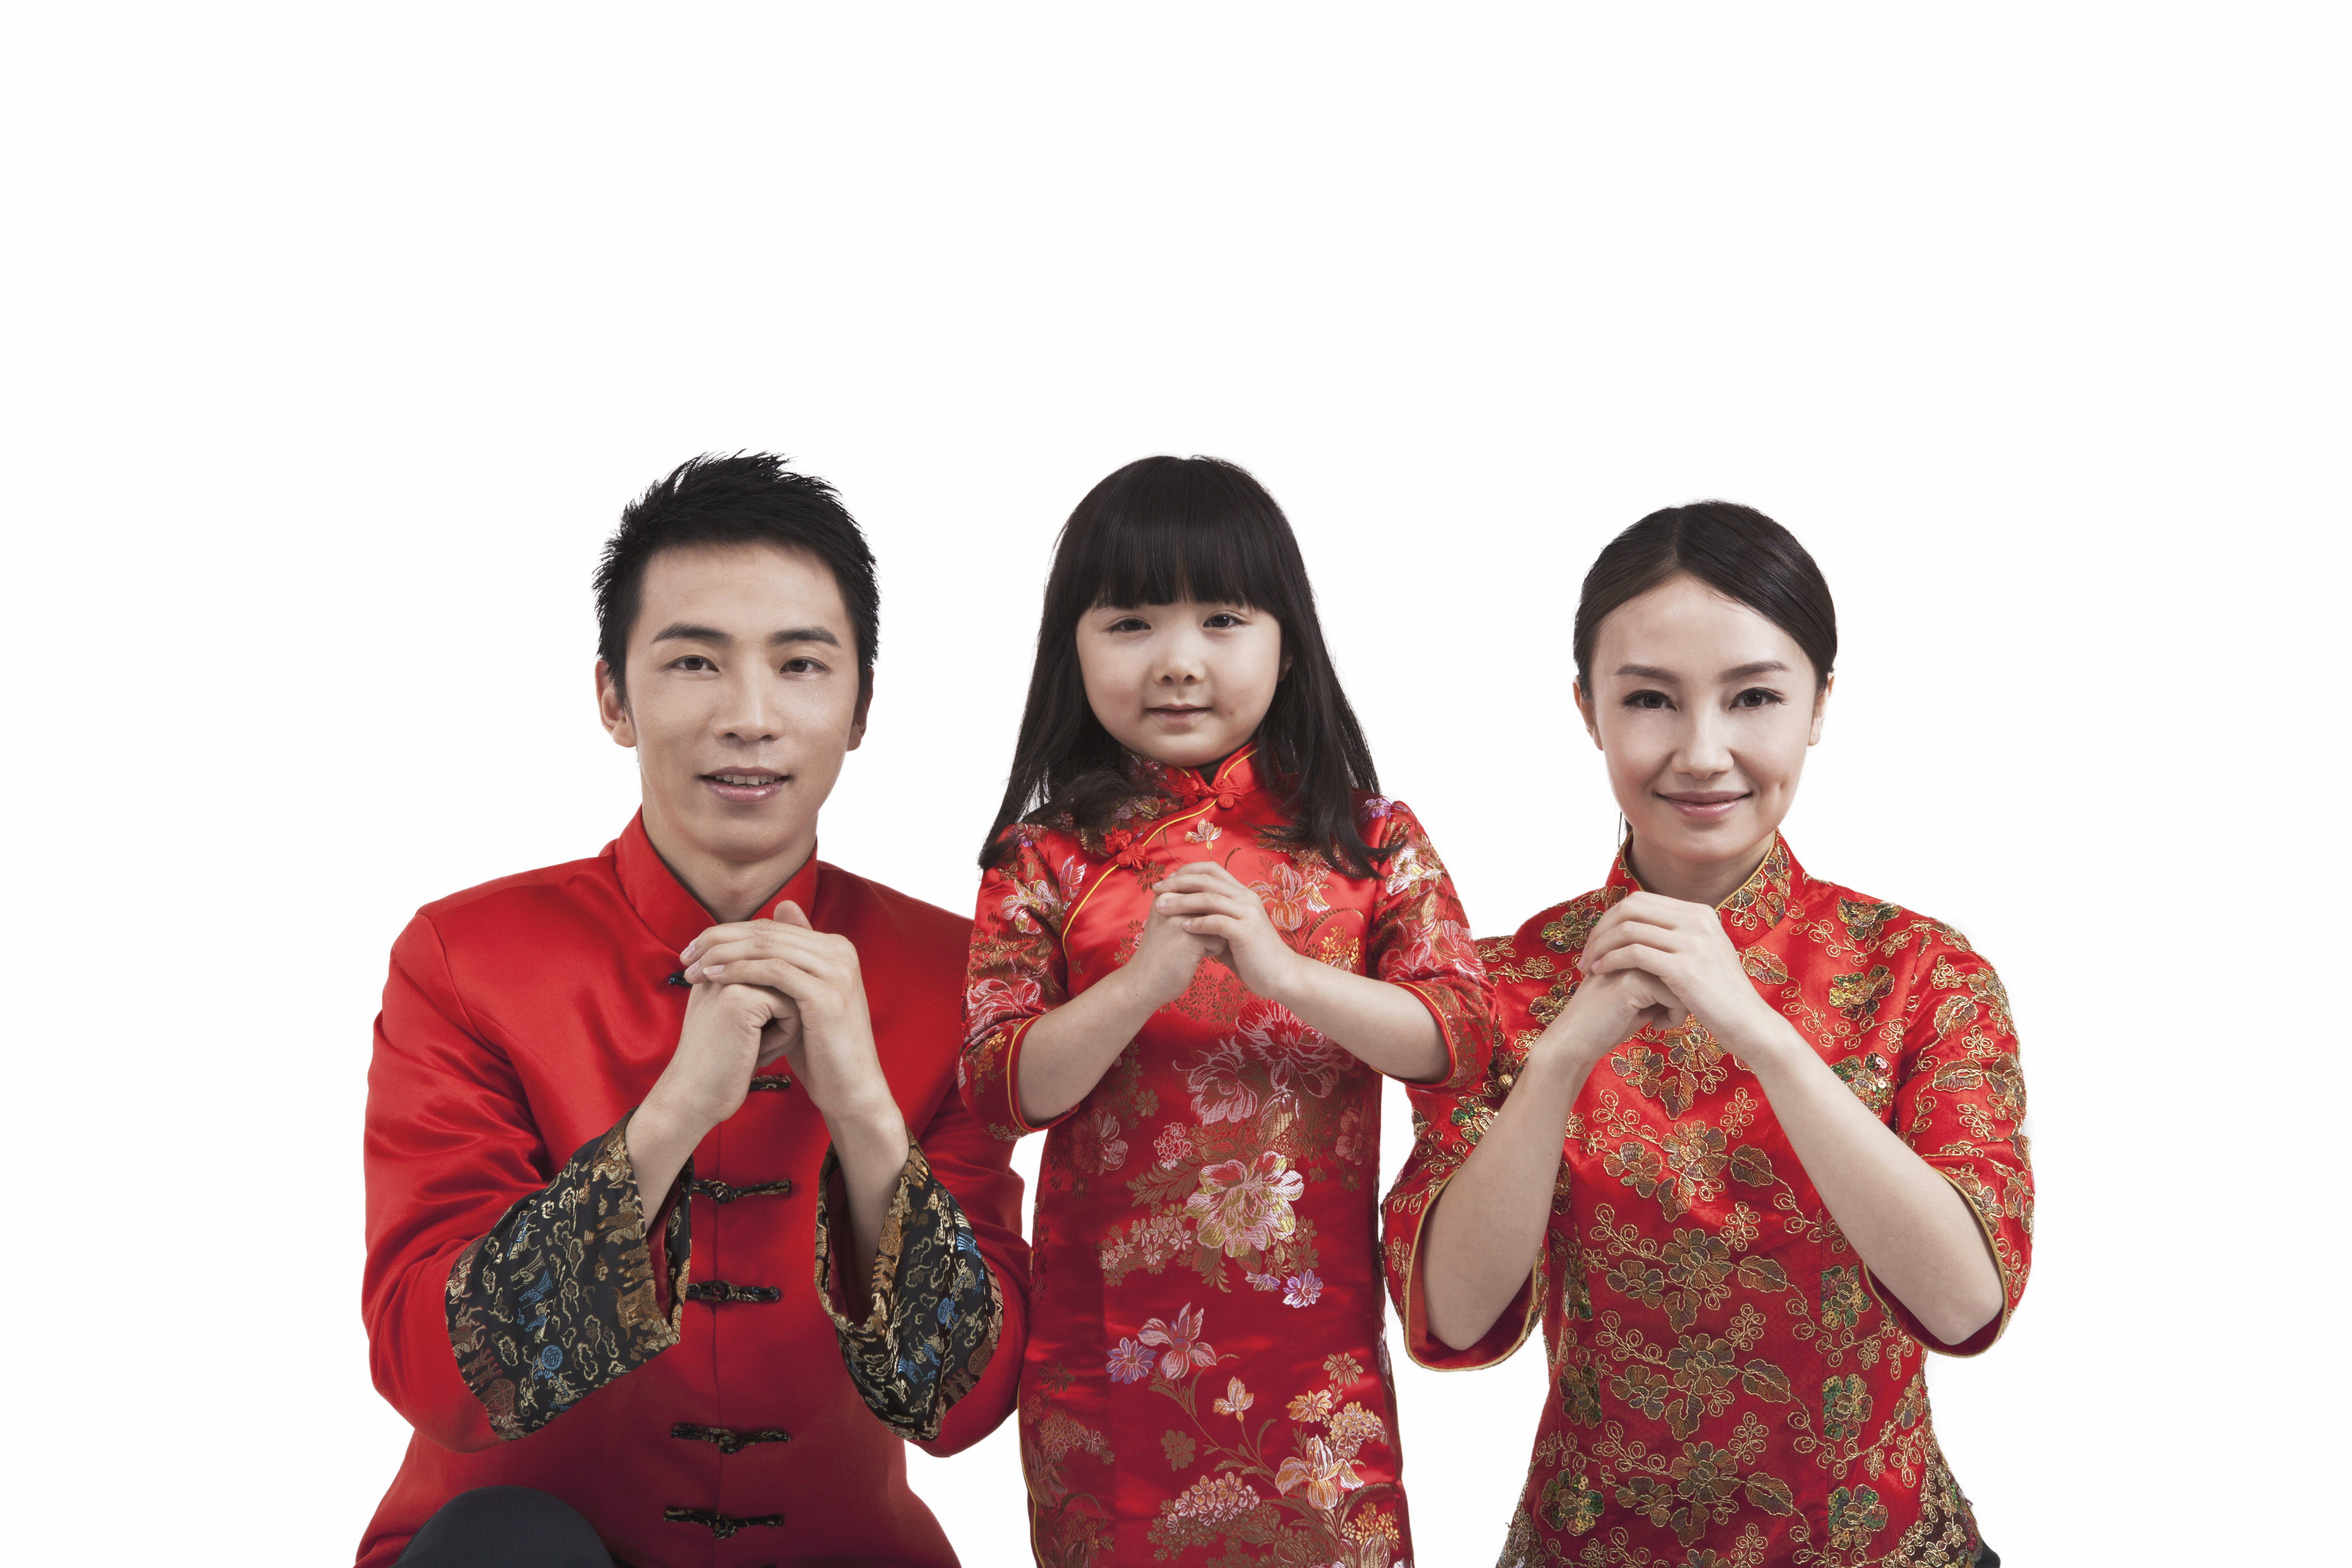 Happy New Year in Chinese and Other Greetings – Chinese New Year 20205616 x 3744